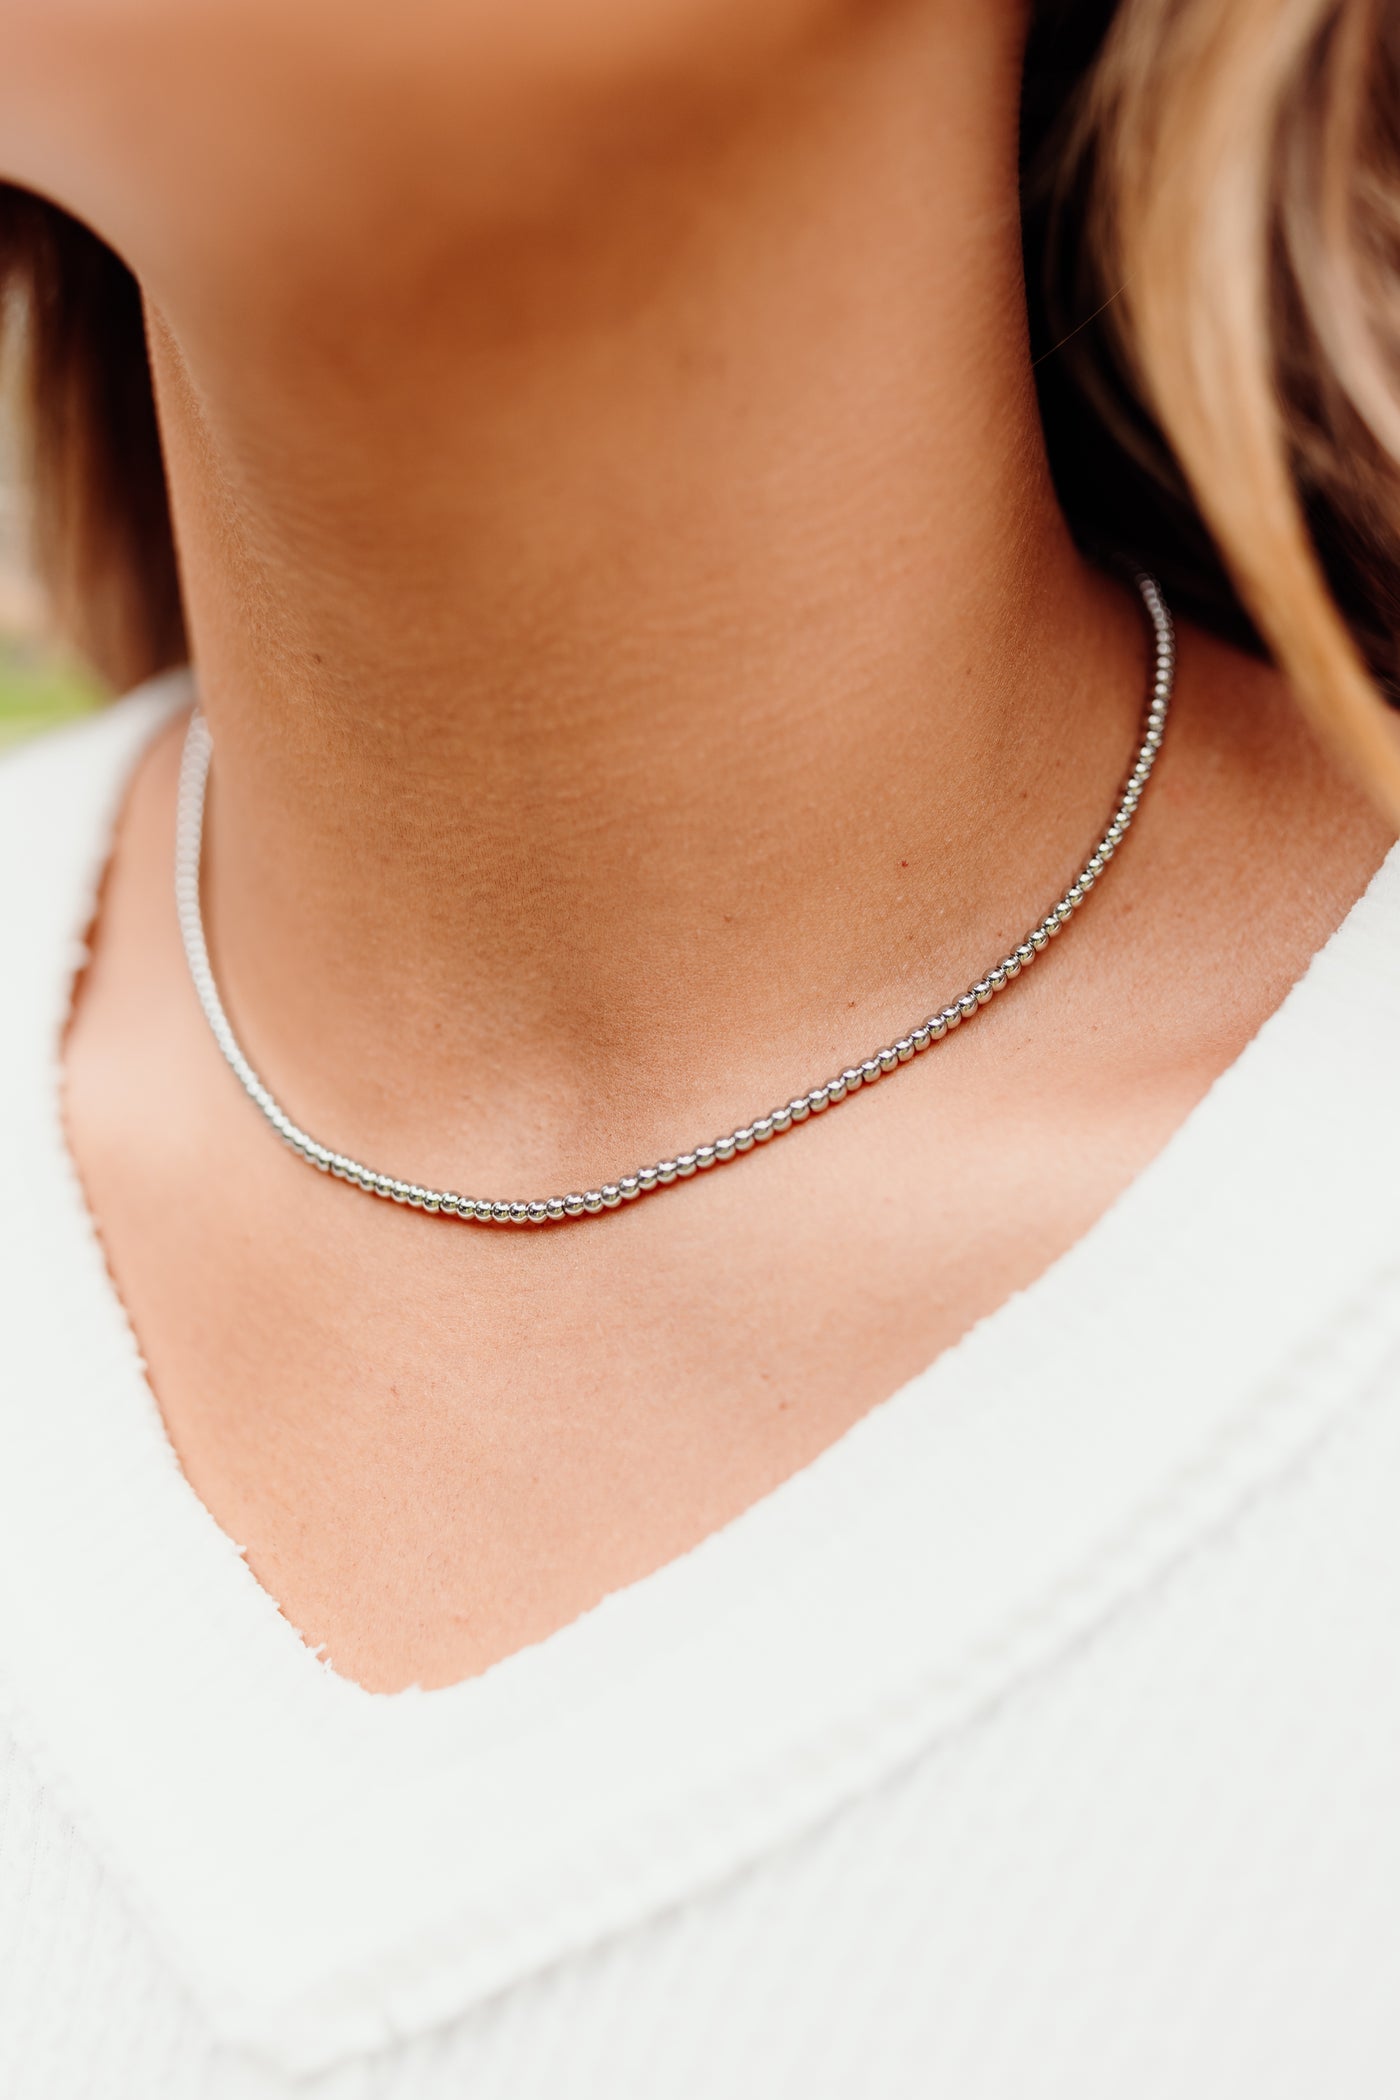 Silver Stainless Steel Dainty 3mm Beaded Chain Necklace